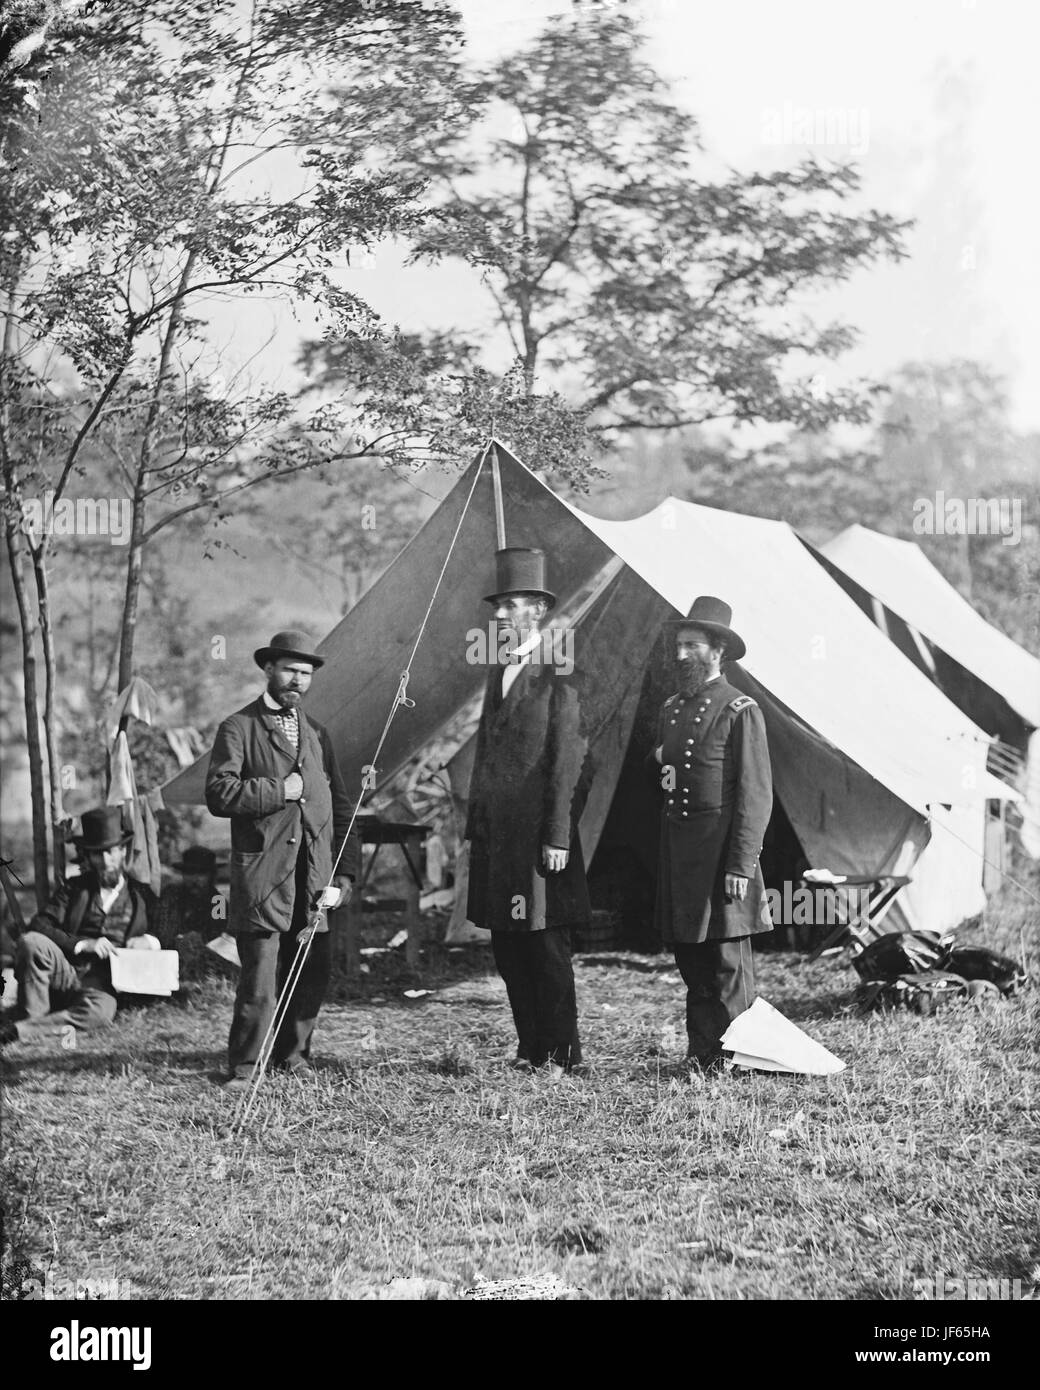 Antietam, Md. - Allan Pinkerton, President Abraham Lincoln, and Maj. Gen. John A. McClernand Photograph from the main eastern theater of the war, Battle of Antietam, September-October 1862. CREATED/PUBLISHED:  1862 October 3. CREATOR: Gardner, Alexander, 1821-1882, photographer. Stock Photo